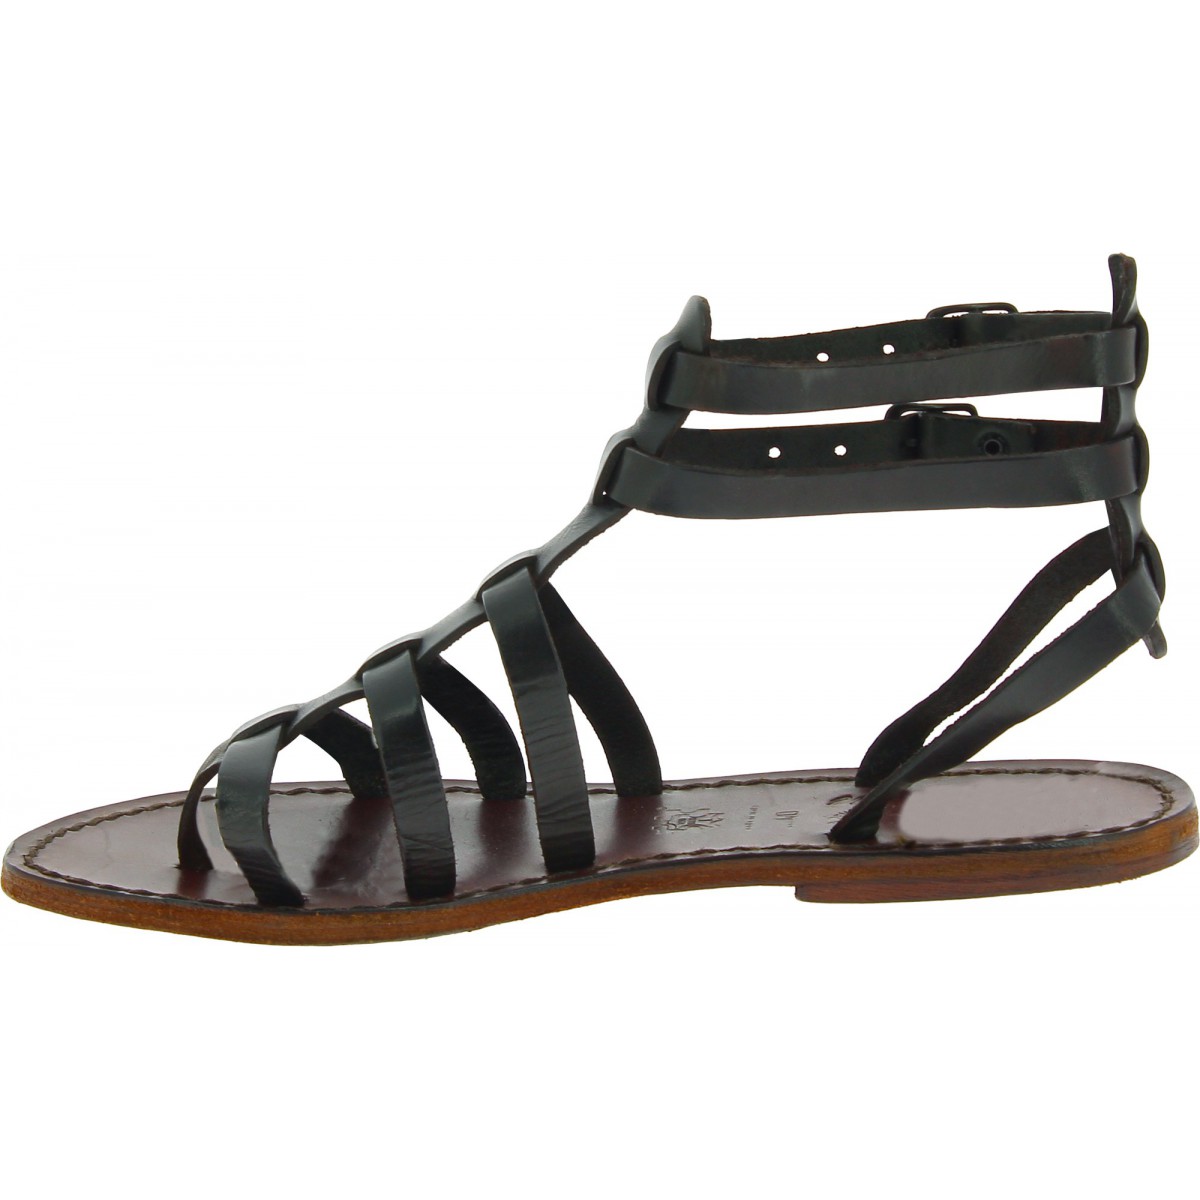 Dark brown gladiator sandals for women real leather Handmade in Italy ...